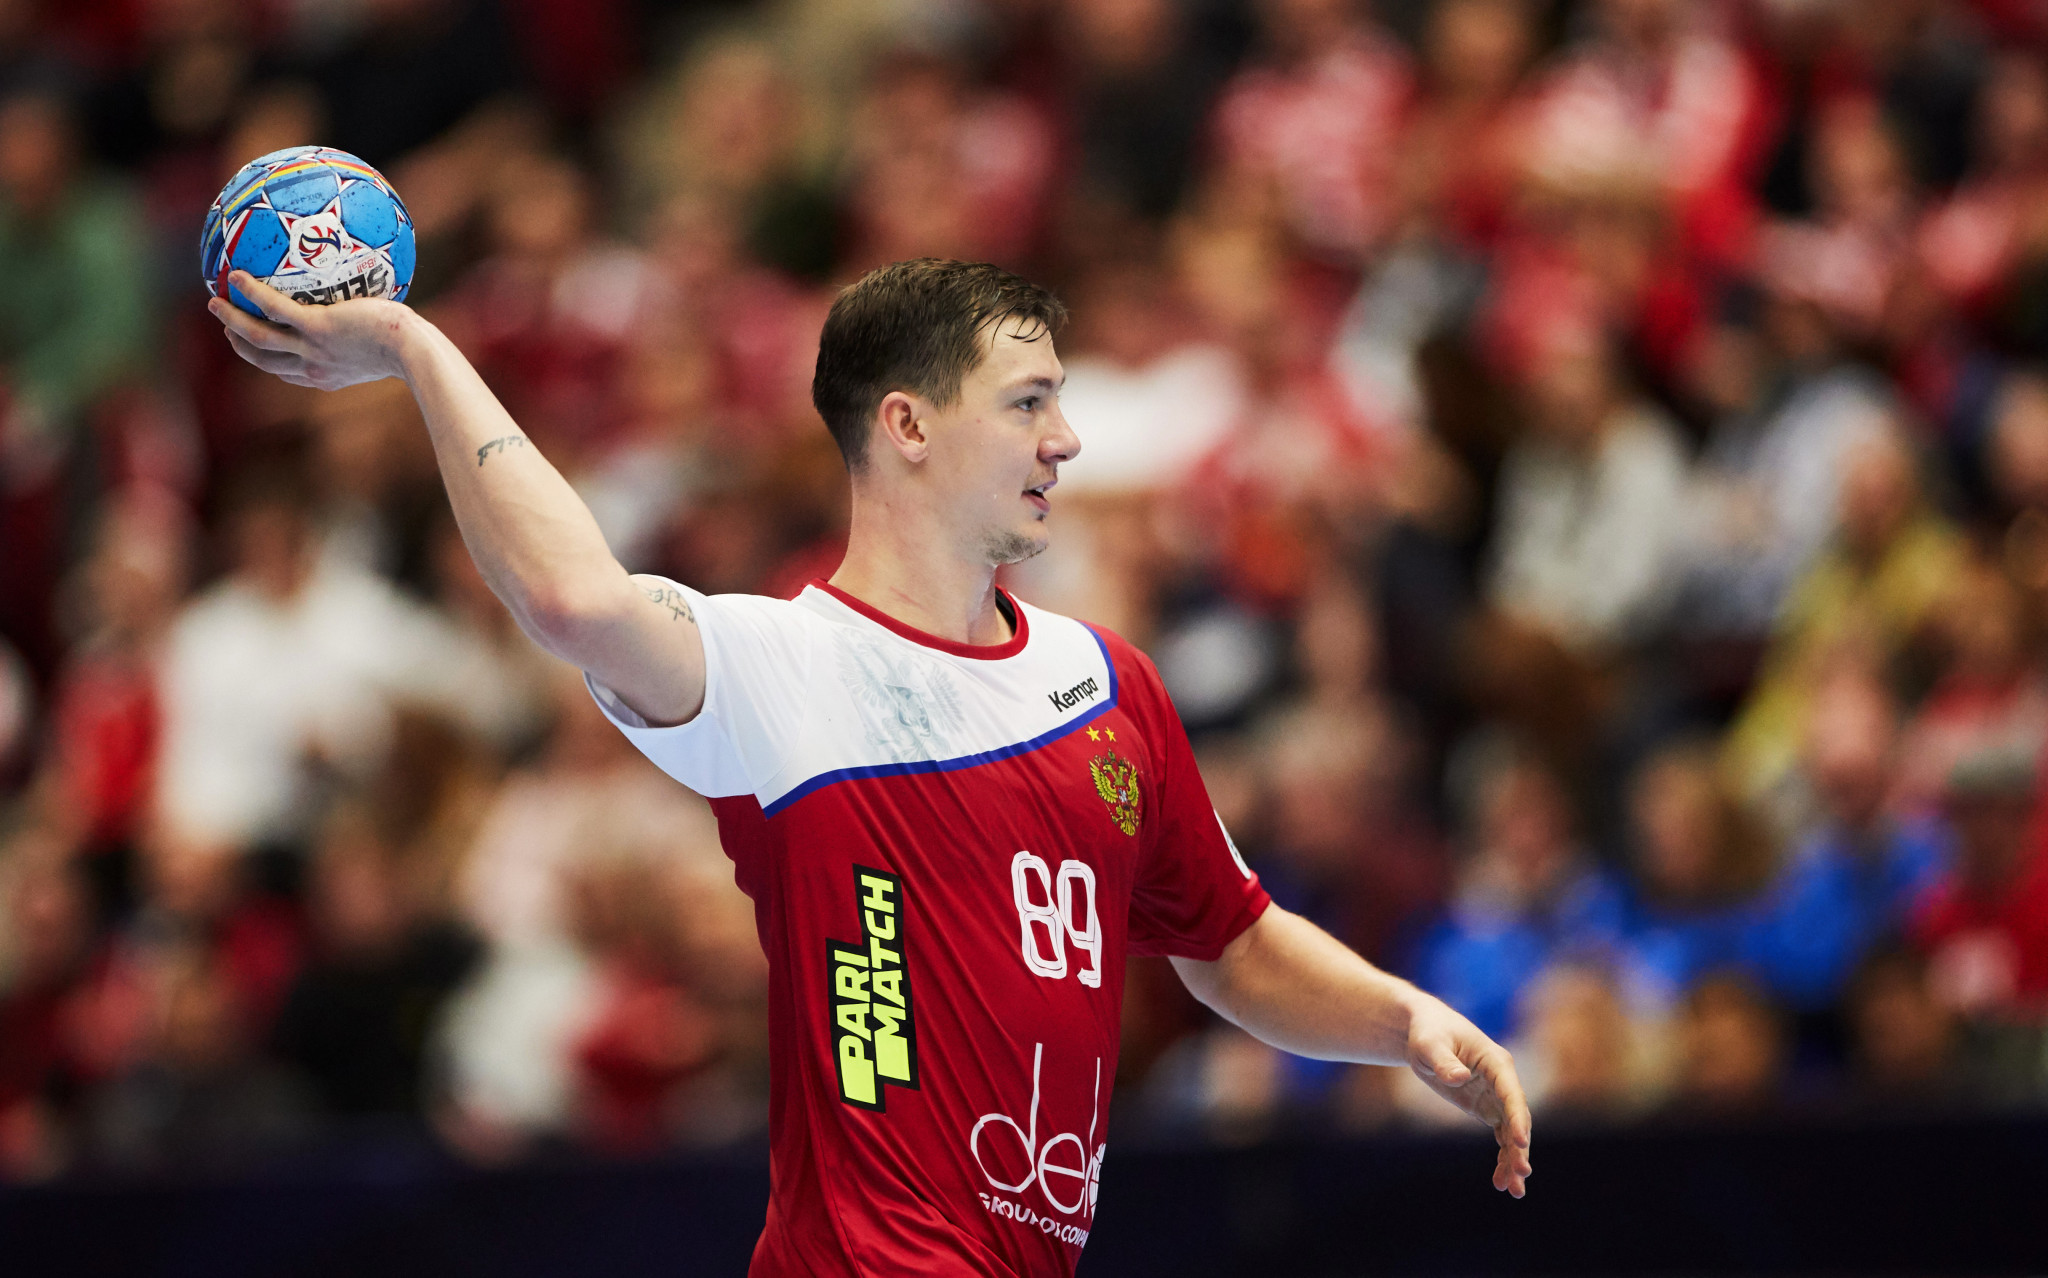 Poland and Russia have been awarded the wildcards for the 2021 IHF Men's World Championships ©Getty Images